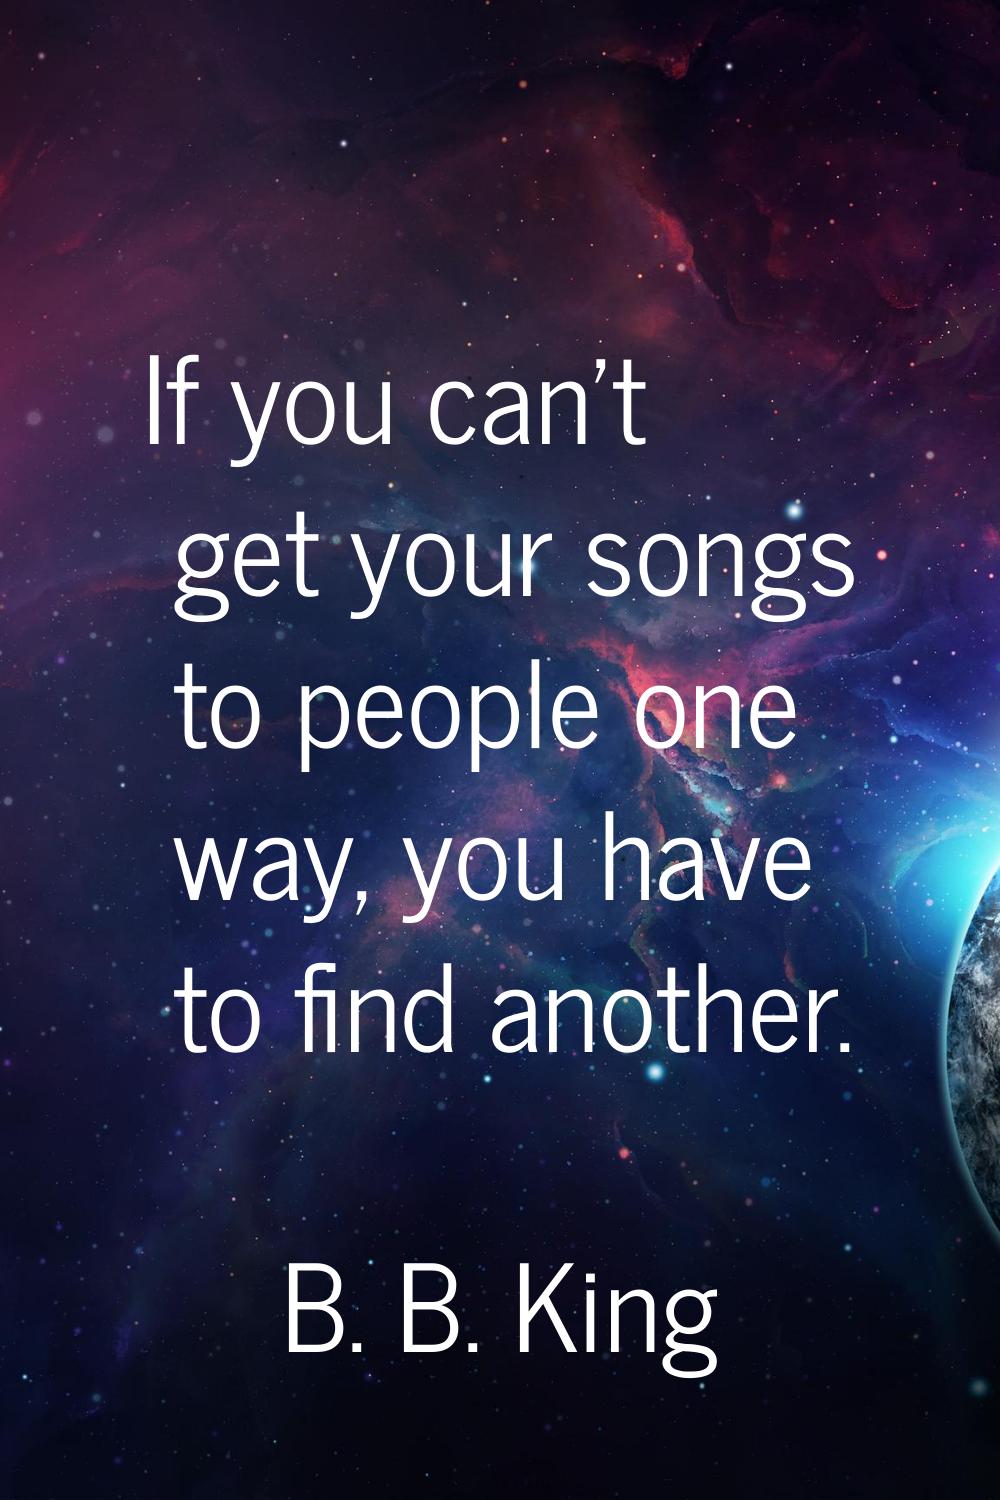 If you can't get your songs to people one way, you have to find another.